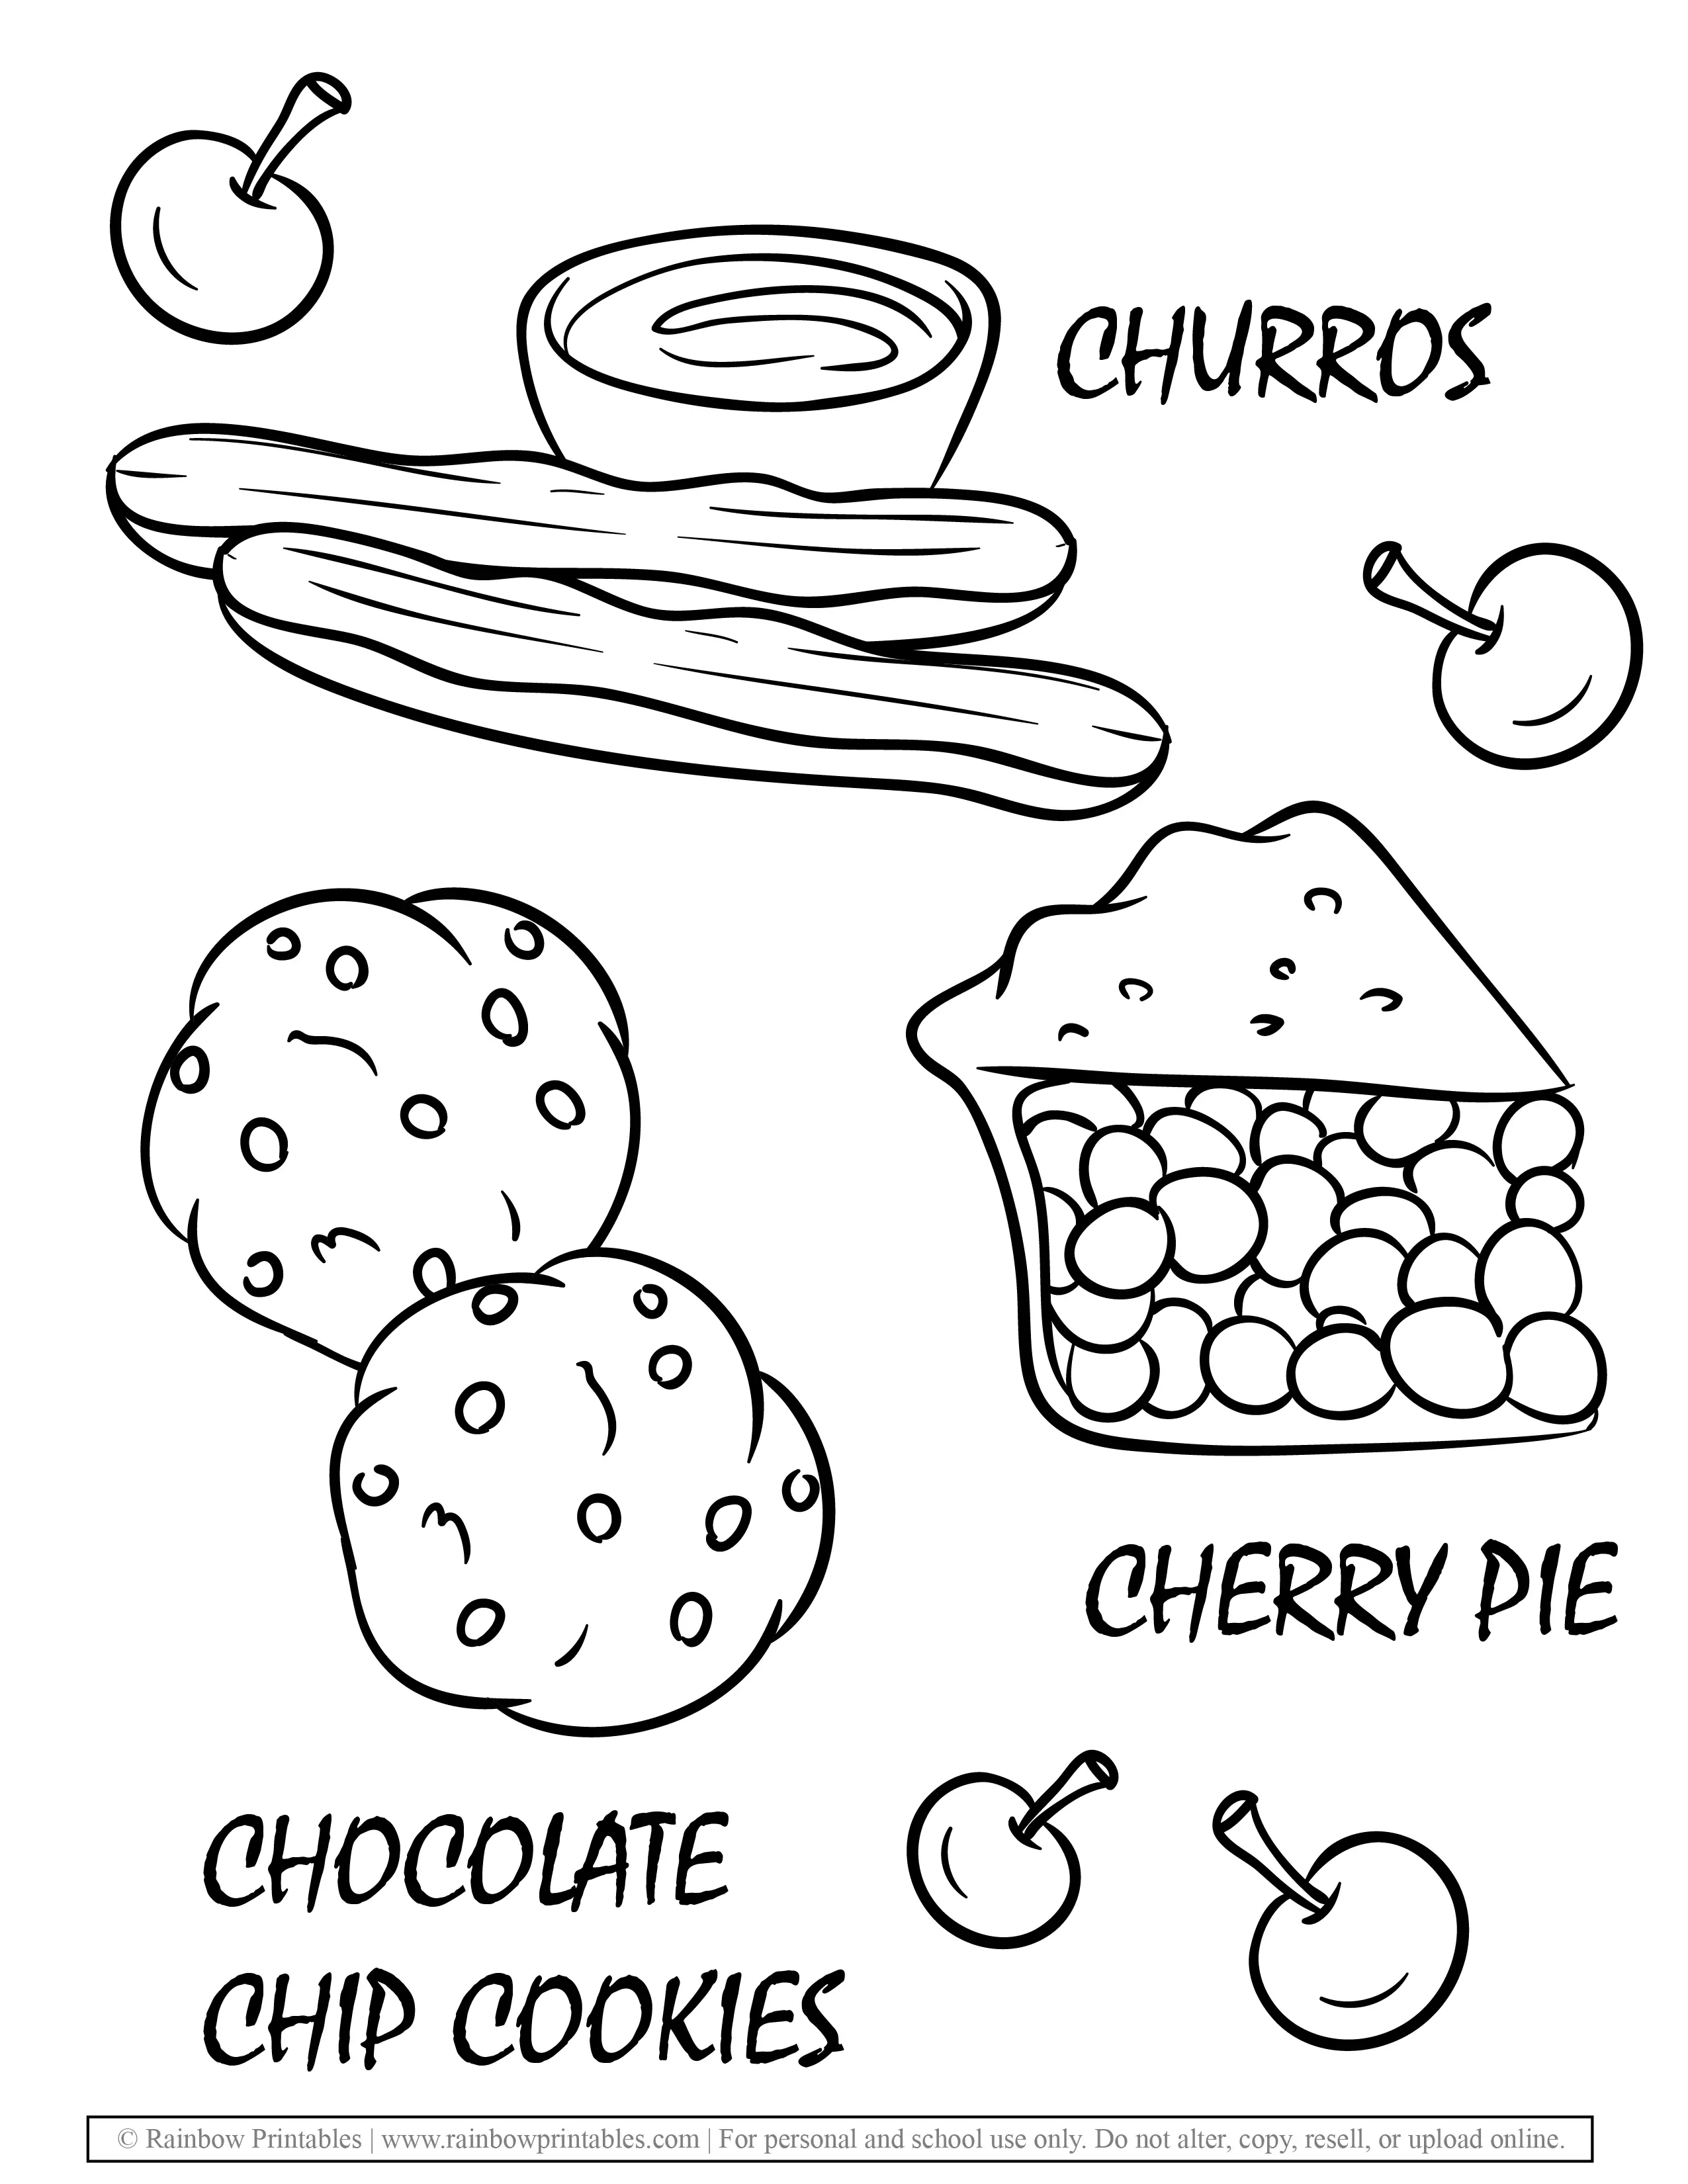 SNACK FOODS CHURROS CHOCOLATE CHIP COOKIES CHERRY PIE Dessert Coloring Pages for Kids Yummy